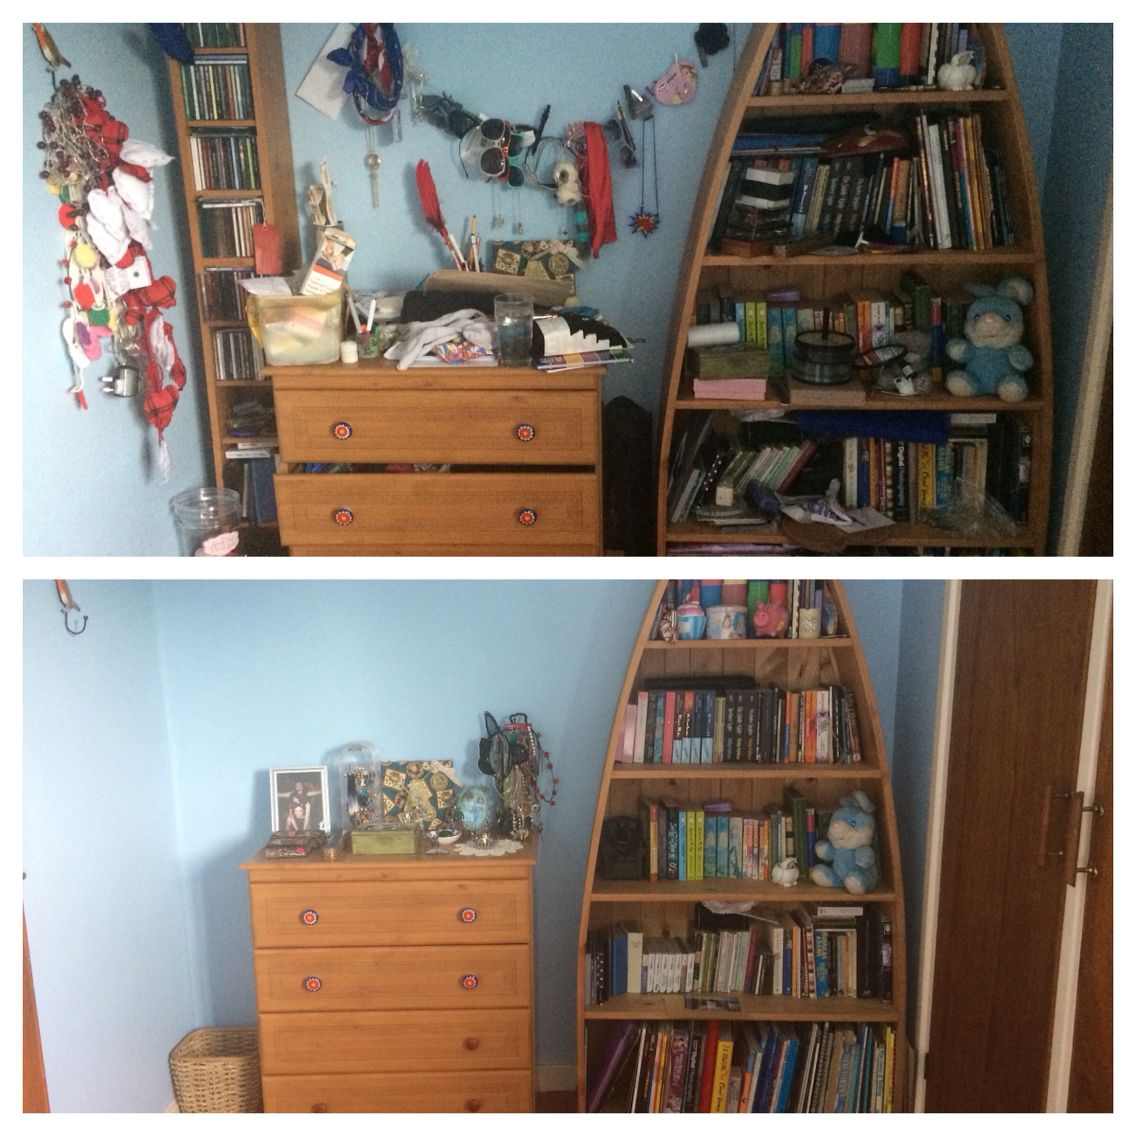 20 Photos of Messy Rooms Before and After Cleaning I Stay ay Home Mum